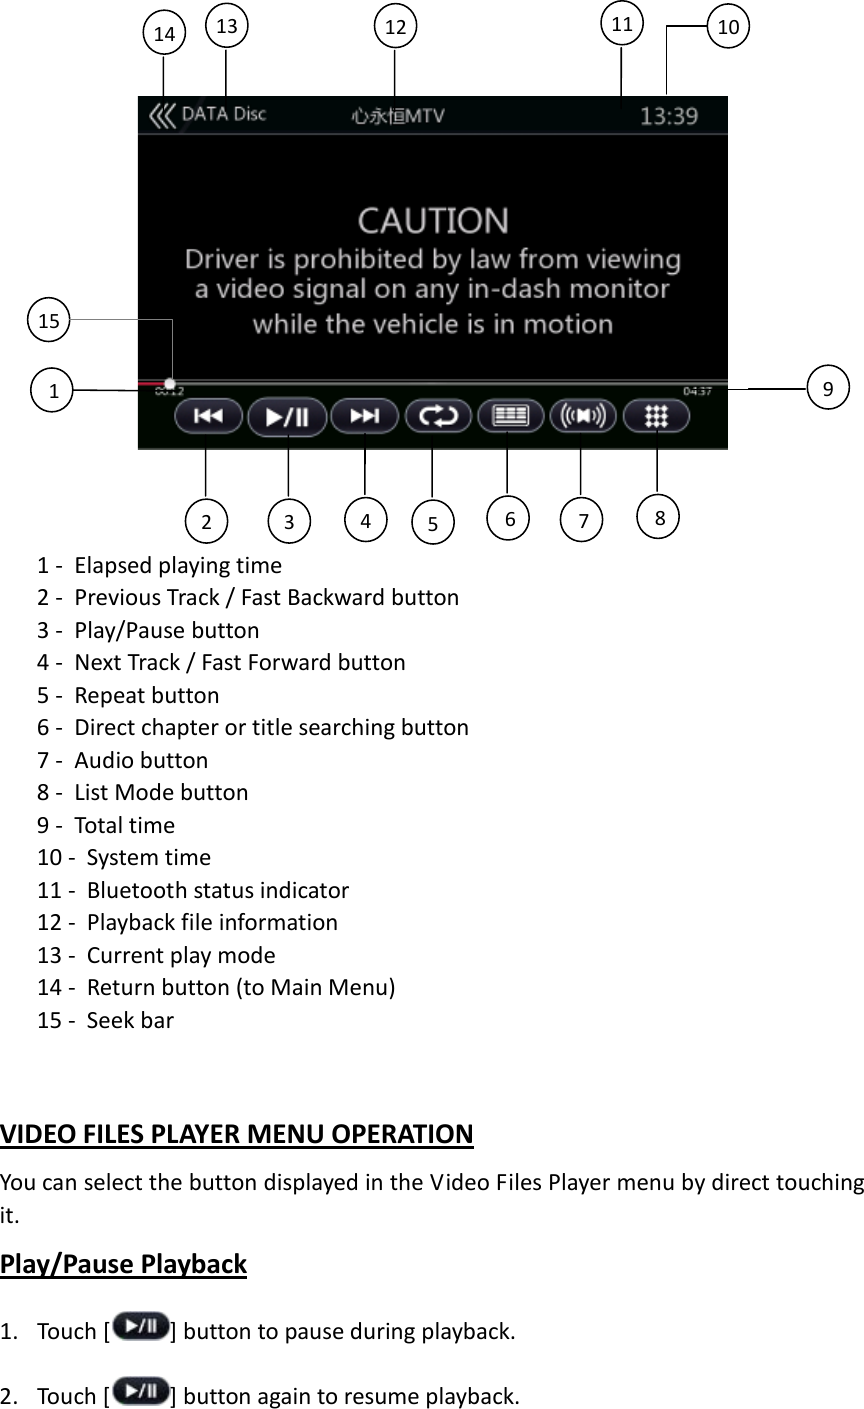        1 - Elapsed playing time   2 - Previous Track / Fast Backward button 3 - Play/Pause button 4 - Next Track / Fast Forward button 5 - Repeat button 6 - Direct chapter or title searching button 7 - Audio button   8 - List Mode button 9 - Total time   10 - System time   11 - Bluetooth status indicator 12 - Playback file information 13 - Current play mode 14 - Return button (to Main Menu) 15 - Seek bar    VIDEO FILES PLAYER MENU OPERATION You can select the button displayed in the Video Files Player menu by direct touching it. Play/Pause Playback 1. Touch [ ] button to pause during playback. 2. Touch [ ] button again to resume playback.   13  11  12  14   1 10   6 4  2   8 5  3   7 9  15  